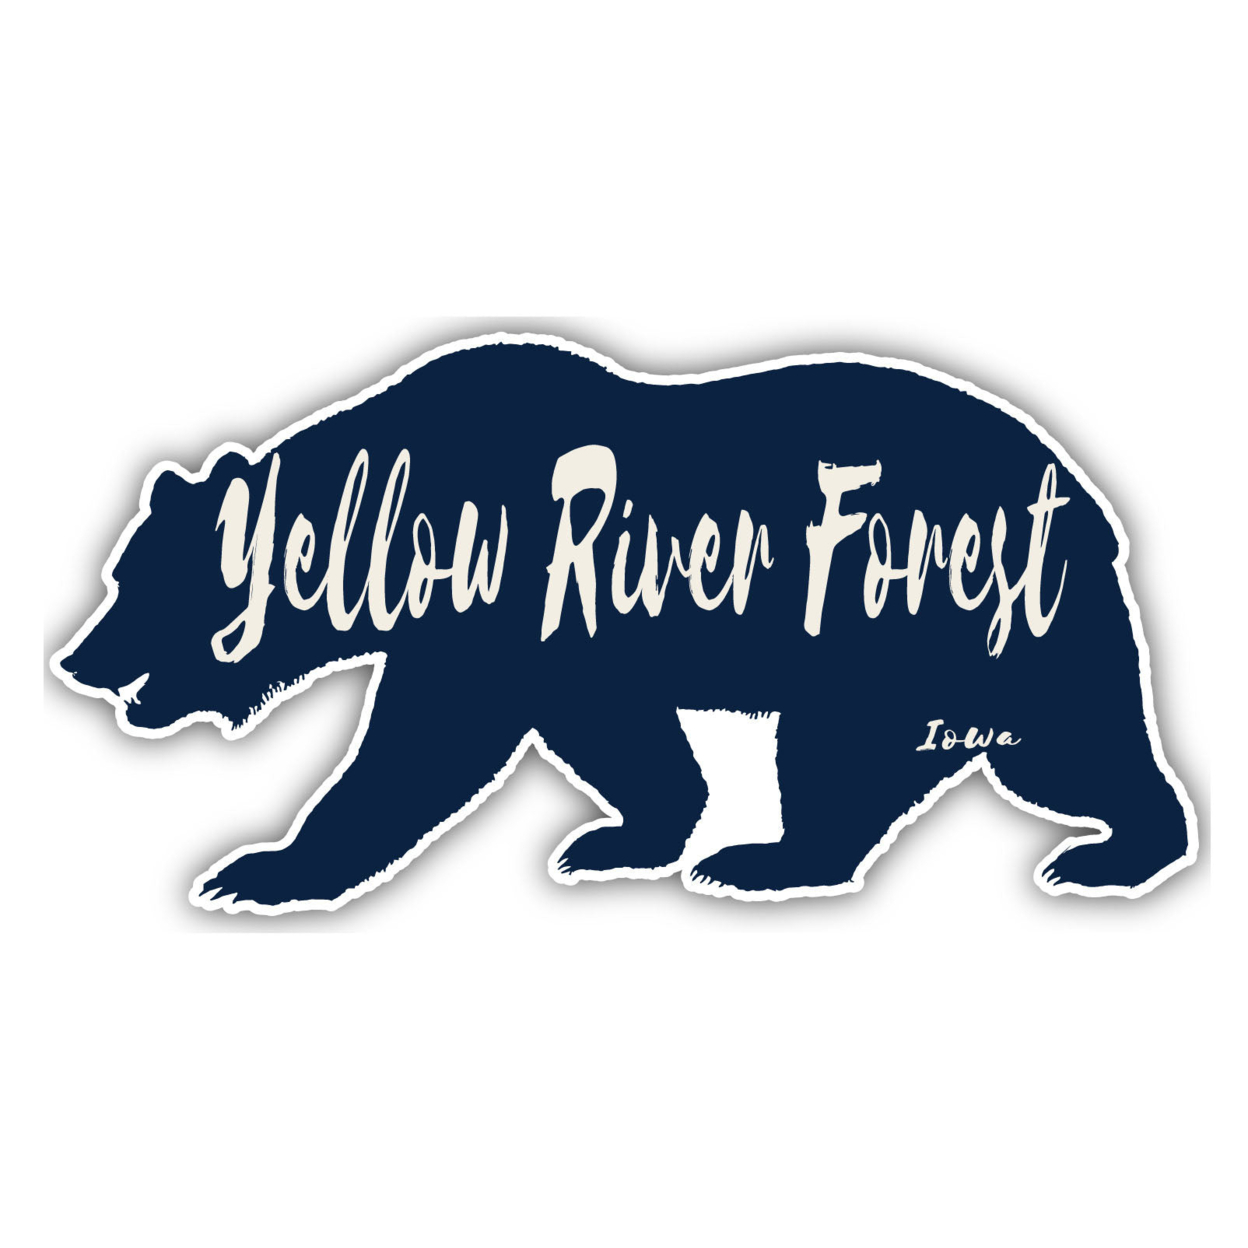 Yellow River Forest Iowa Souvenir Decorative Stickers (Choose Theme And Size) - Single Unit, 2-Inch, Bear